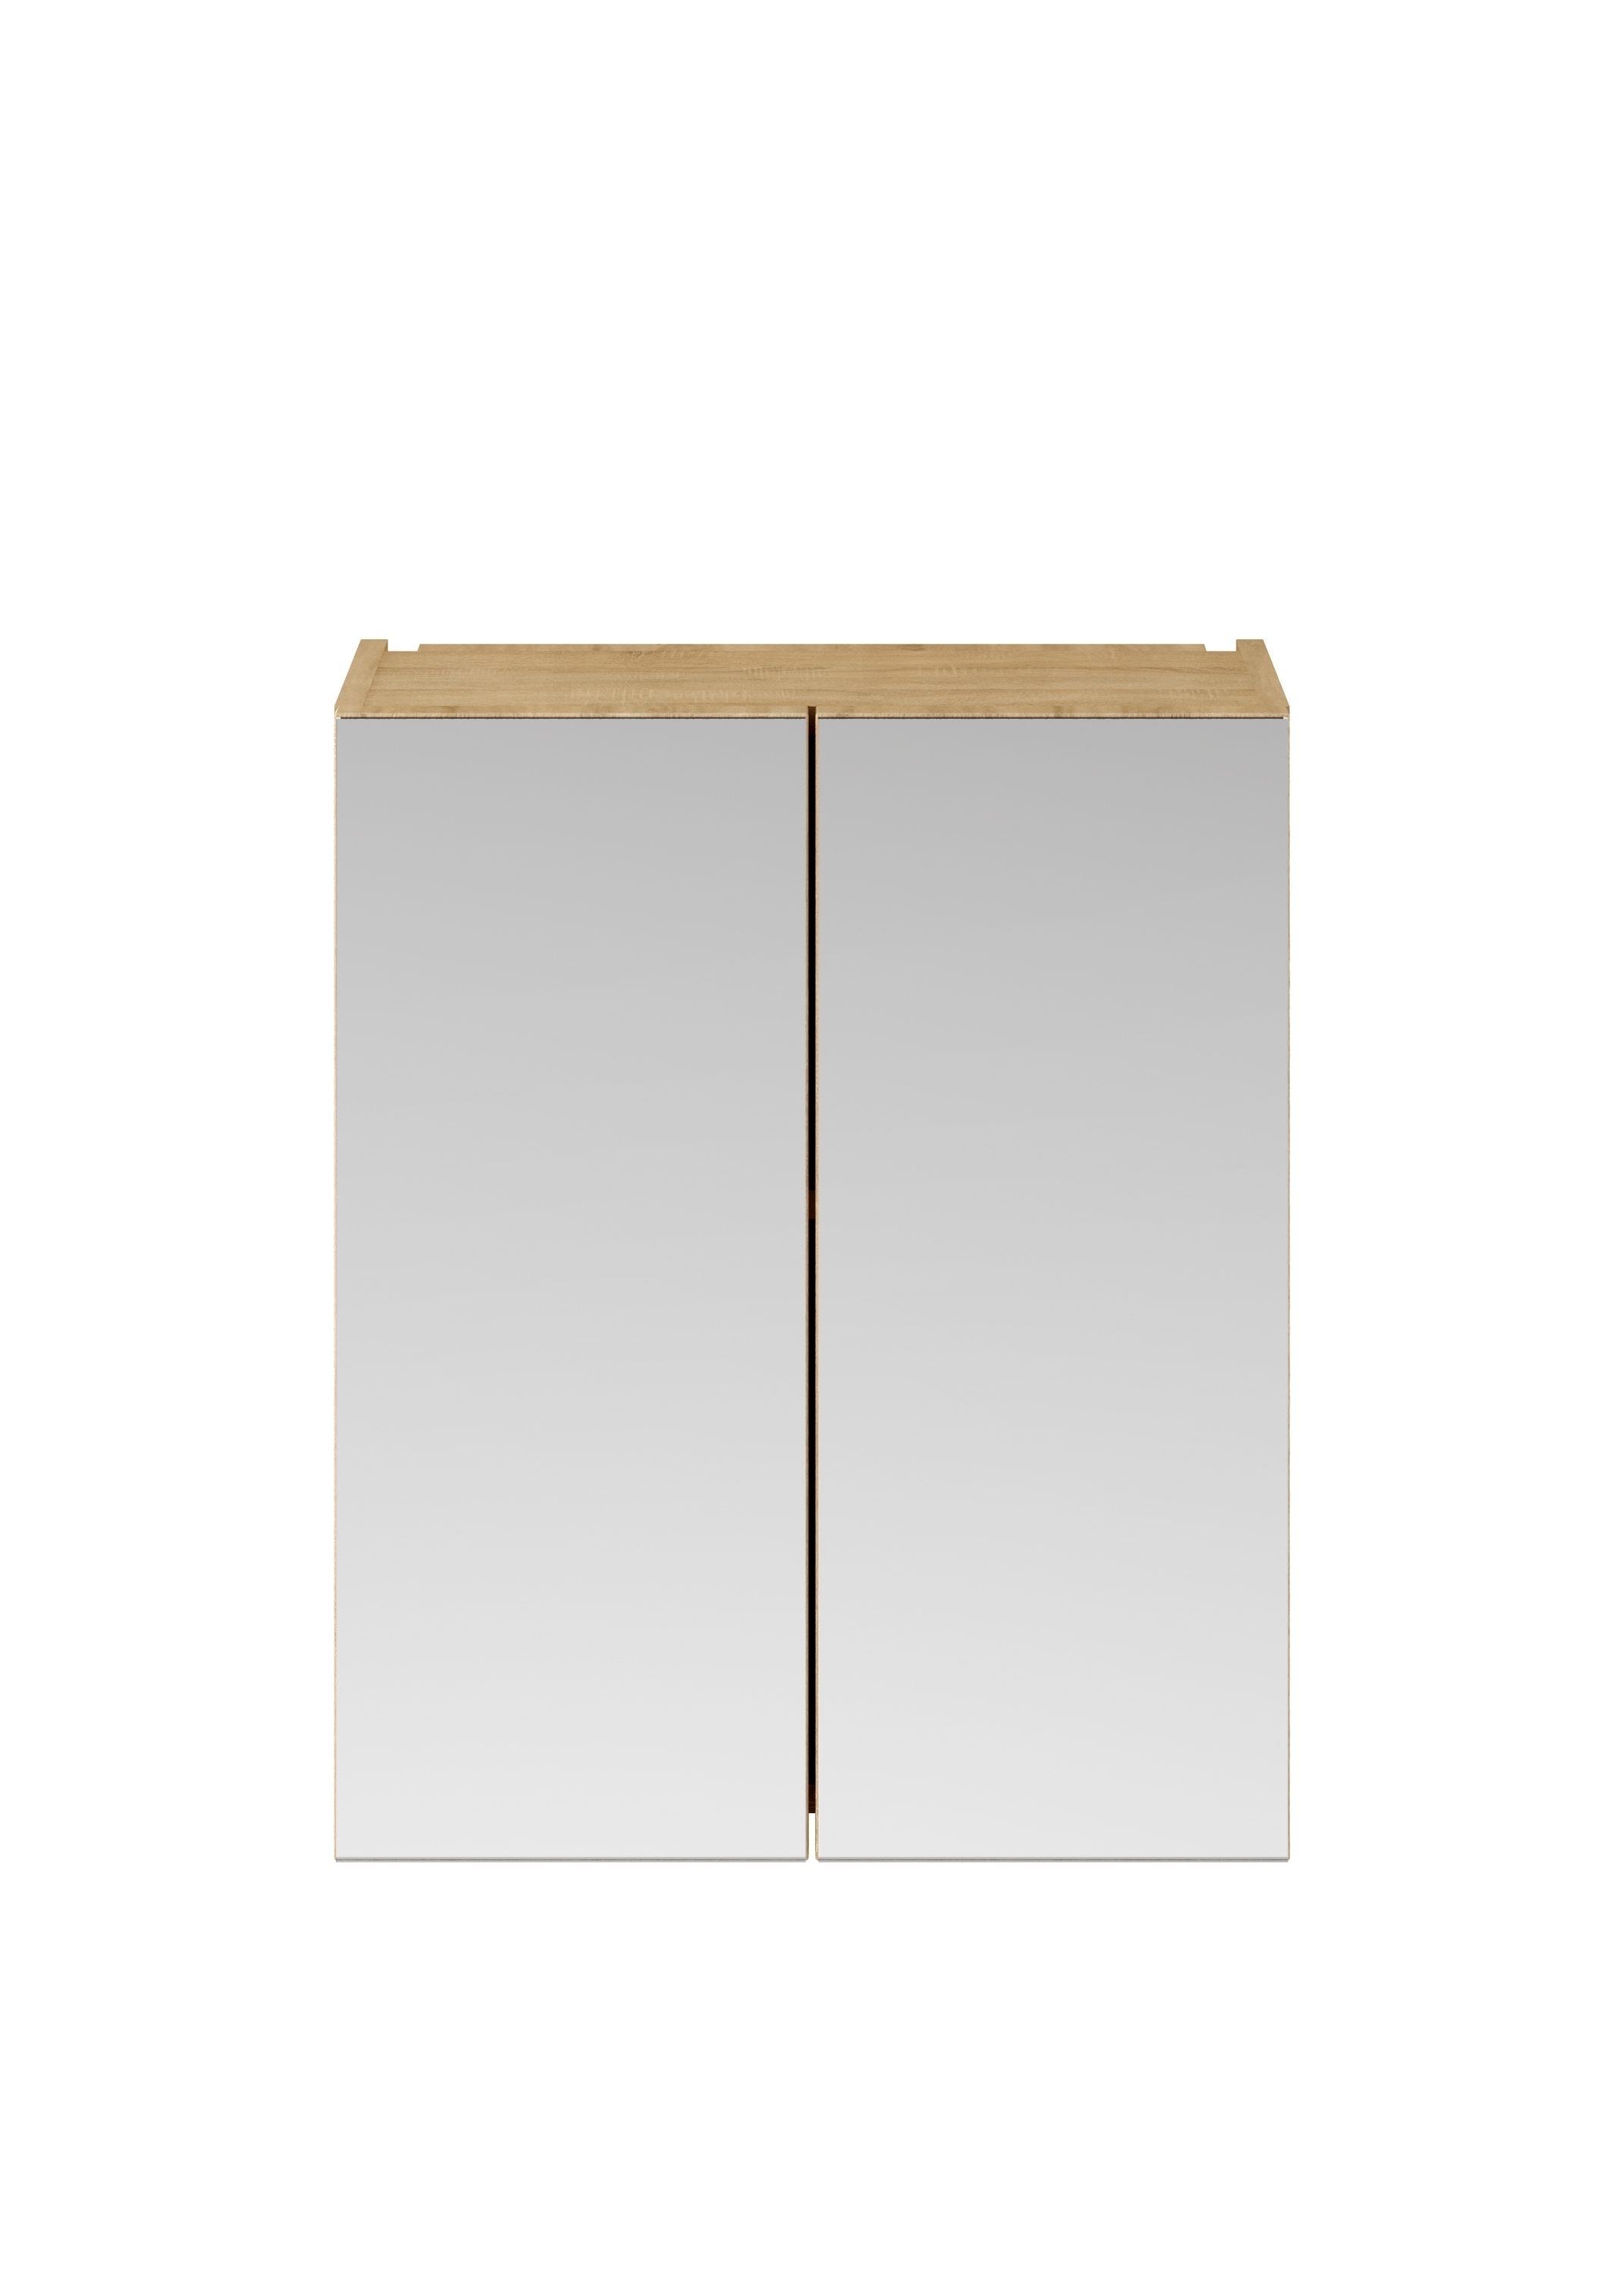 Nuie Athena (50/50) Mirrored Cabinet 600mm Wide - Natural Oak- MOC623 